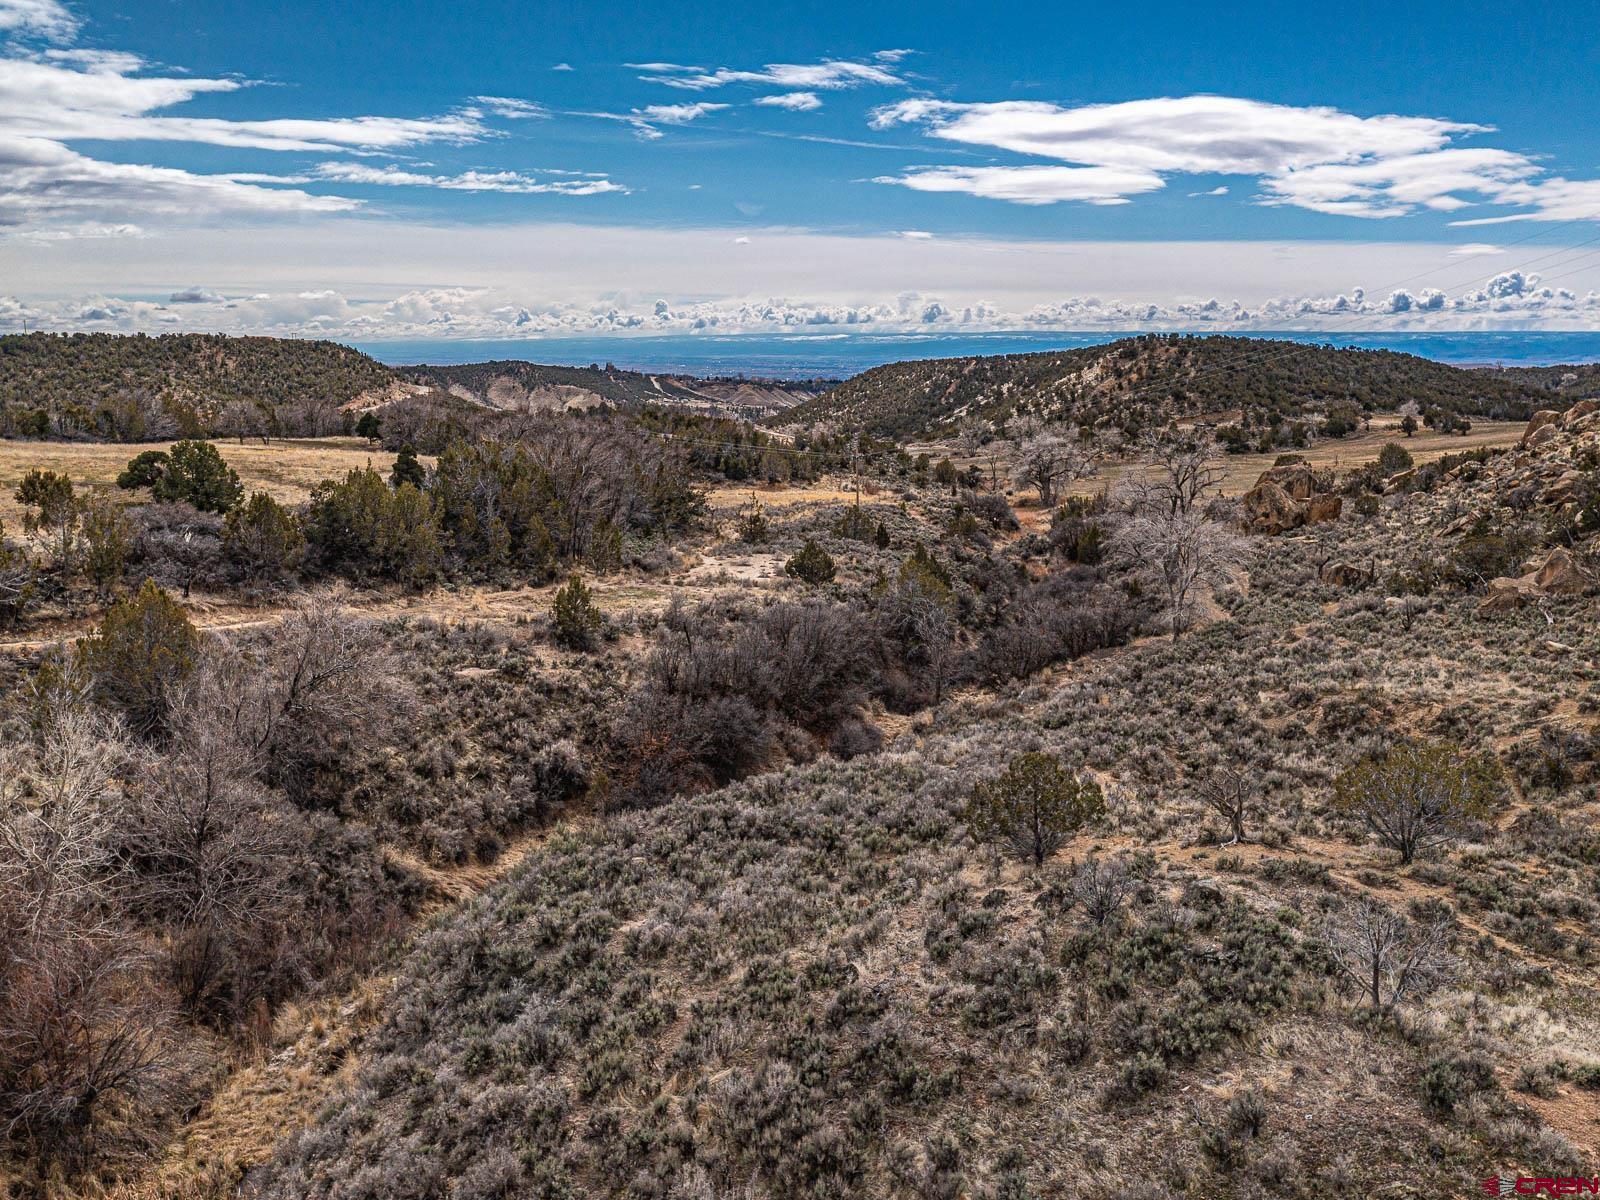 Located near Cedaredge, Colorado, this vacant lot offers the perfect country setting with breathtaking views of the San Juan Mountains, the Grand Mesa, and Coalby Canyon. The 108-acre spacious lot provides ample space to build your dream home or create an equestrian camping facility. The lot also features a shop building, outdoor riding arena and round pen, a year-round creek, and several small seasonal ponds. Whether you want to enjoy the tranquility of the countryside or engage in outdoor activities, this lot has it all. With utilities such as standard power already available on the lot, you can easily start working on your dream project. The lot also offers the potential to bring in additional utilities such as high-speed internet, septic tank, standard water, and telephone, making it a versatile piece of land for various purposes. Whether you want to convert the shop into living spaces, use it for a home-based business, or even create an indoor riding arena, the options are numerous on this vacant lot in Cedaredge. Cedaredge is known for its proximity to the Grand Mesa National Forest, offering year-round mountain recreation opportunities. The region also boasts activities such as golfing at Cedaredge Golf Club, big-game hunting on the Grand Mesa, skiing and snowboarding at Powderhorn Resort, hiking, mountain biking, horseback riding, and more. Additionally, the town of Cedaredge offers small-town living with amenities such as the Grand Mesa Arts & Events Center, Pioneer Town Museum, and nearby grocery stores and medical offices. With so much to offer in terms of recreation and amenities, purchasing this vacant lot in Cedaredge is an opportunity not to be missed.